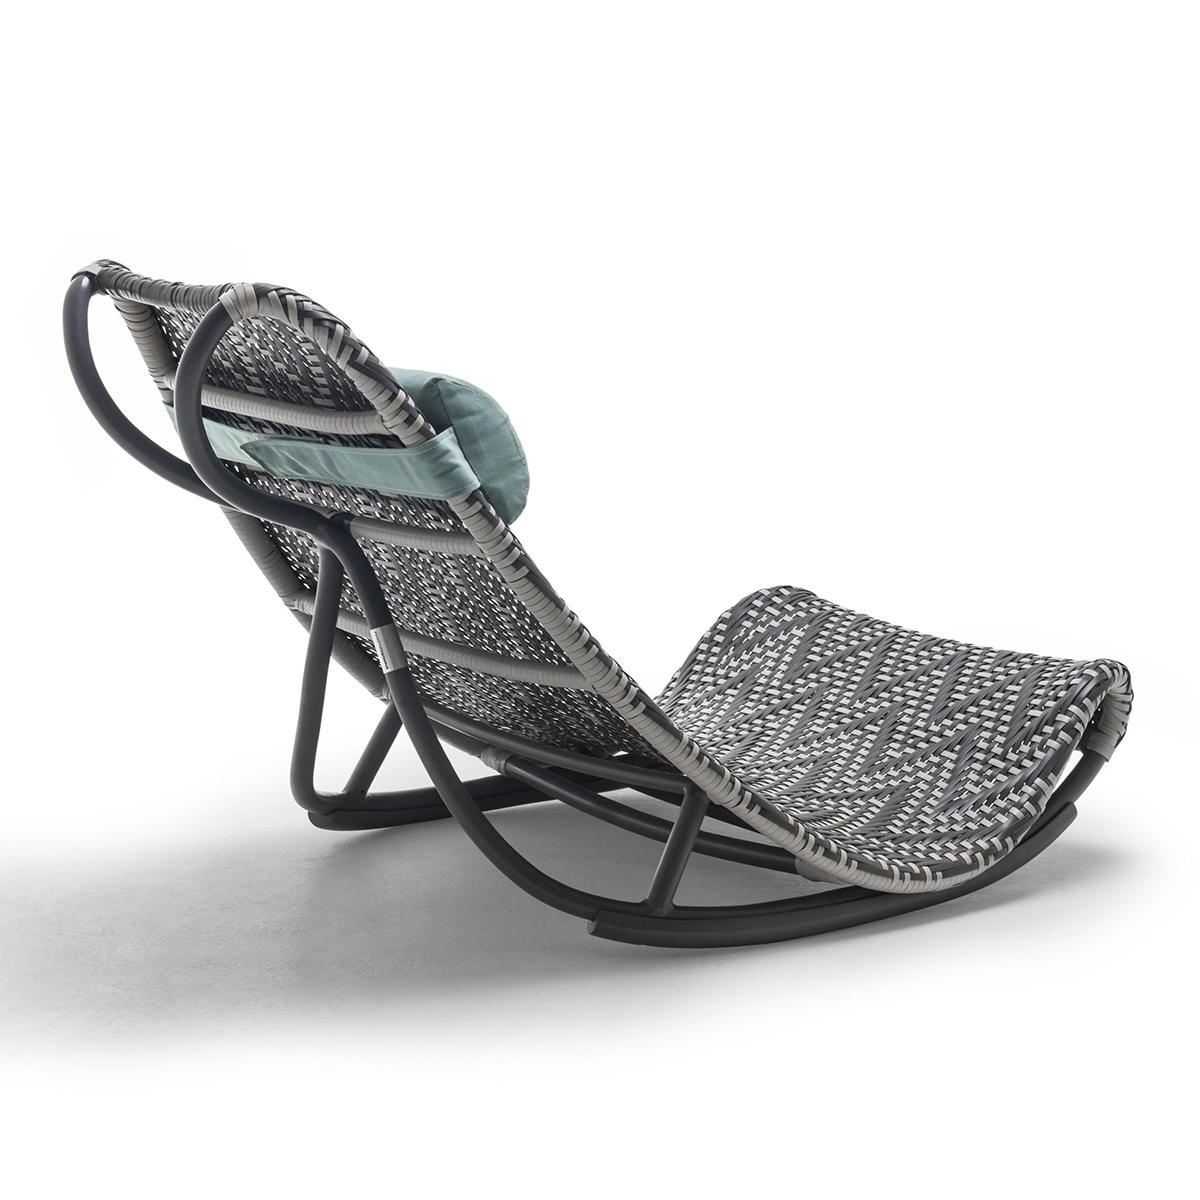 Loungesessel „Loungesessel Relax“ (Philippinisch) im Angebot